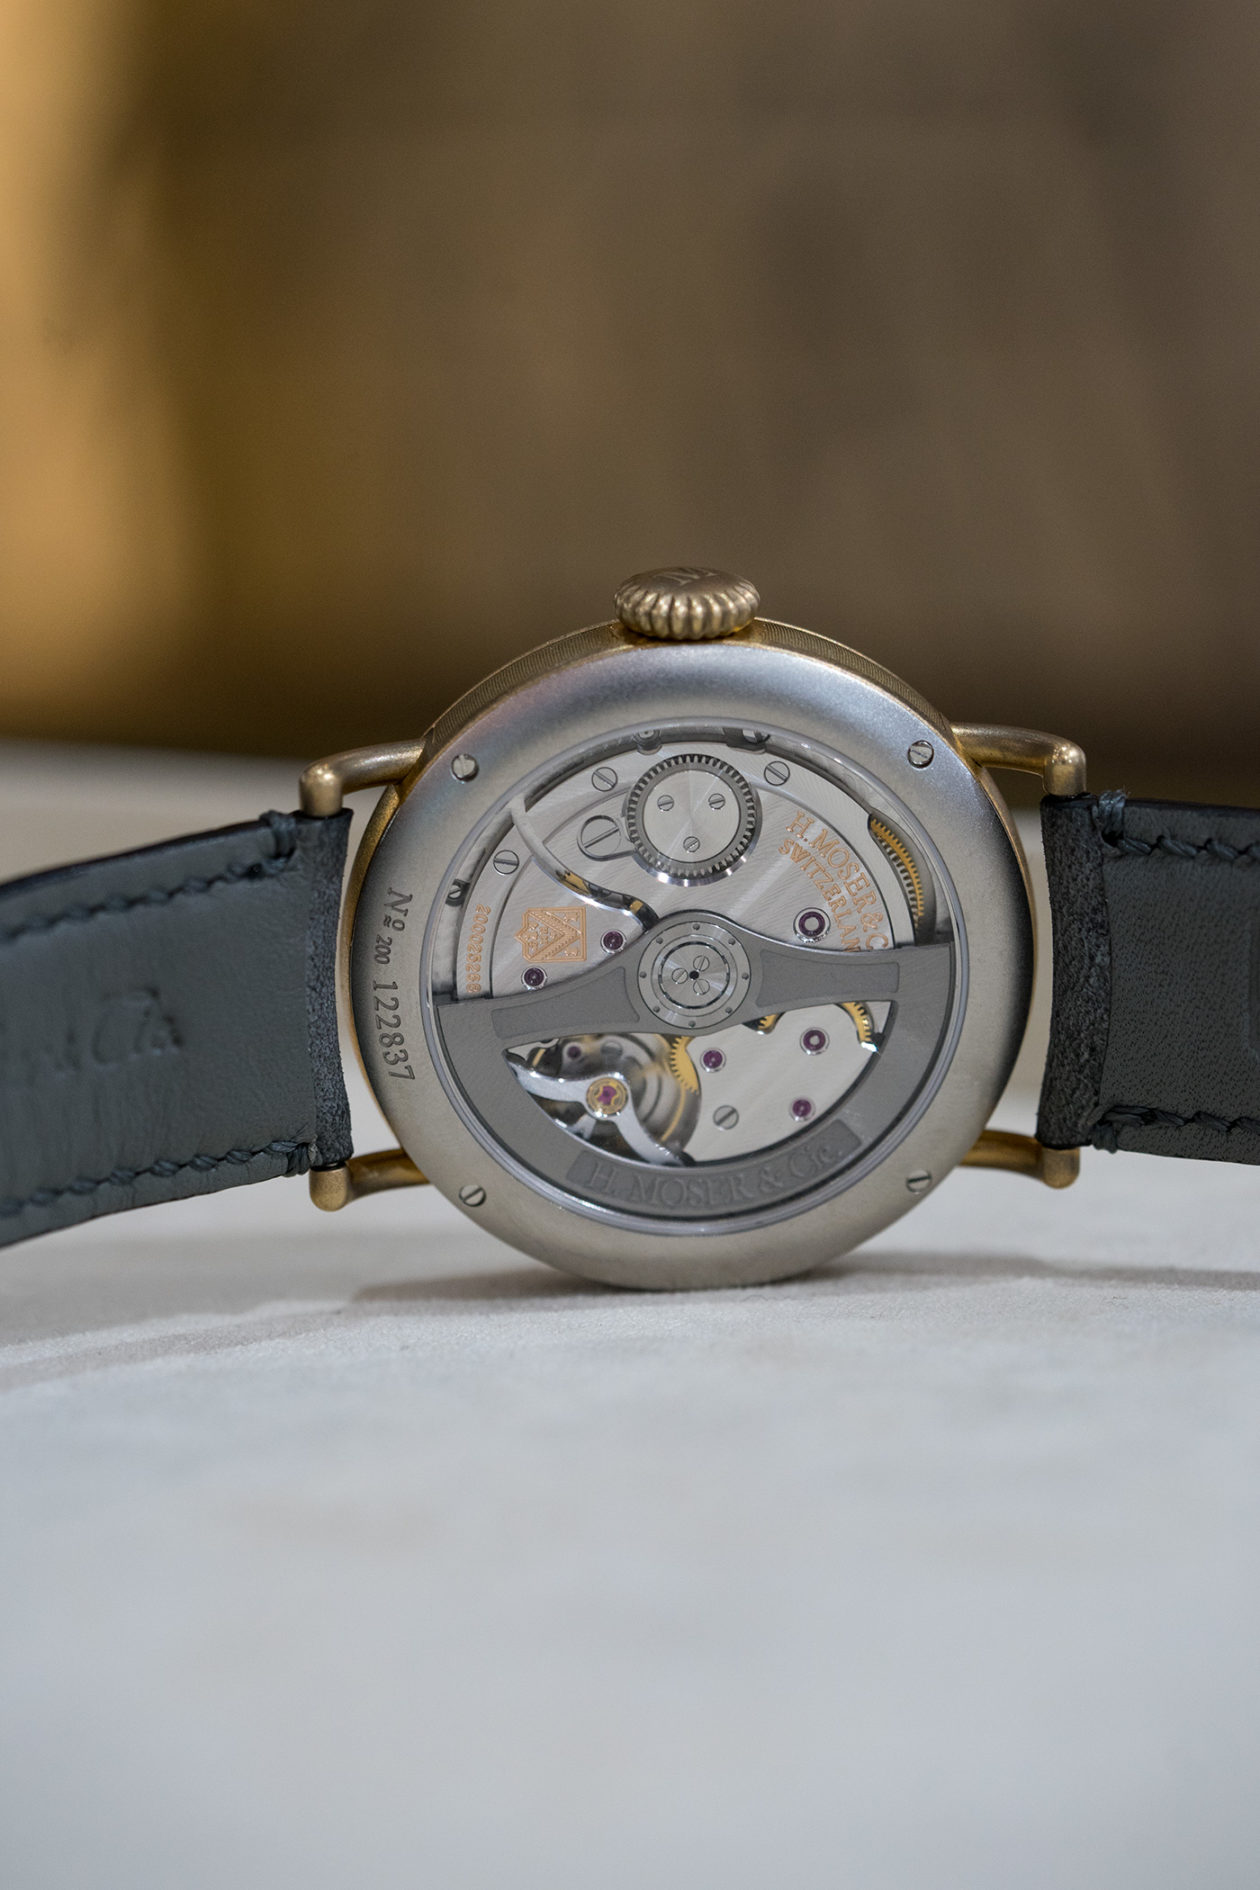 H. Moser & Cie. Heritge Bronze “Since 1828”